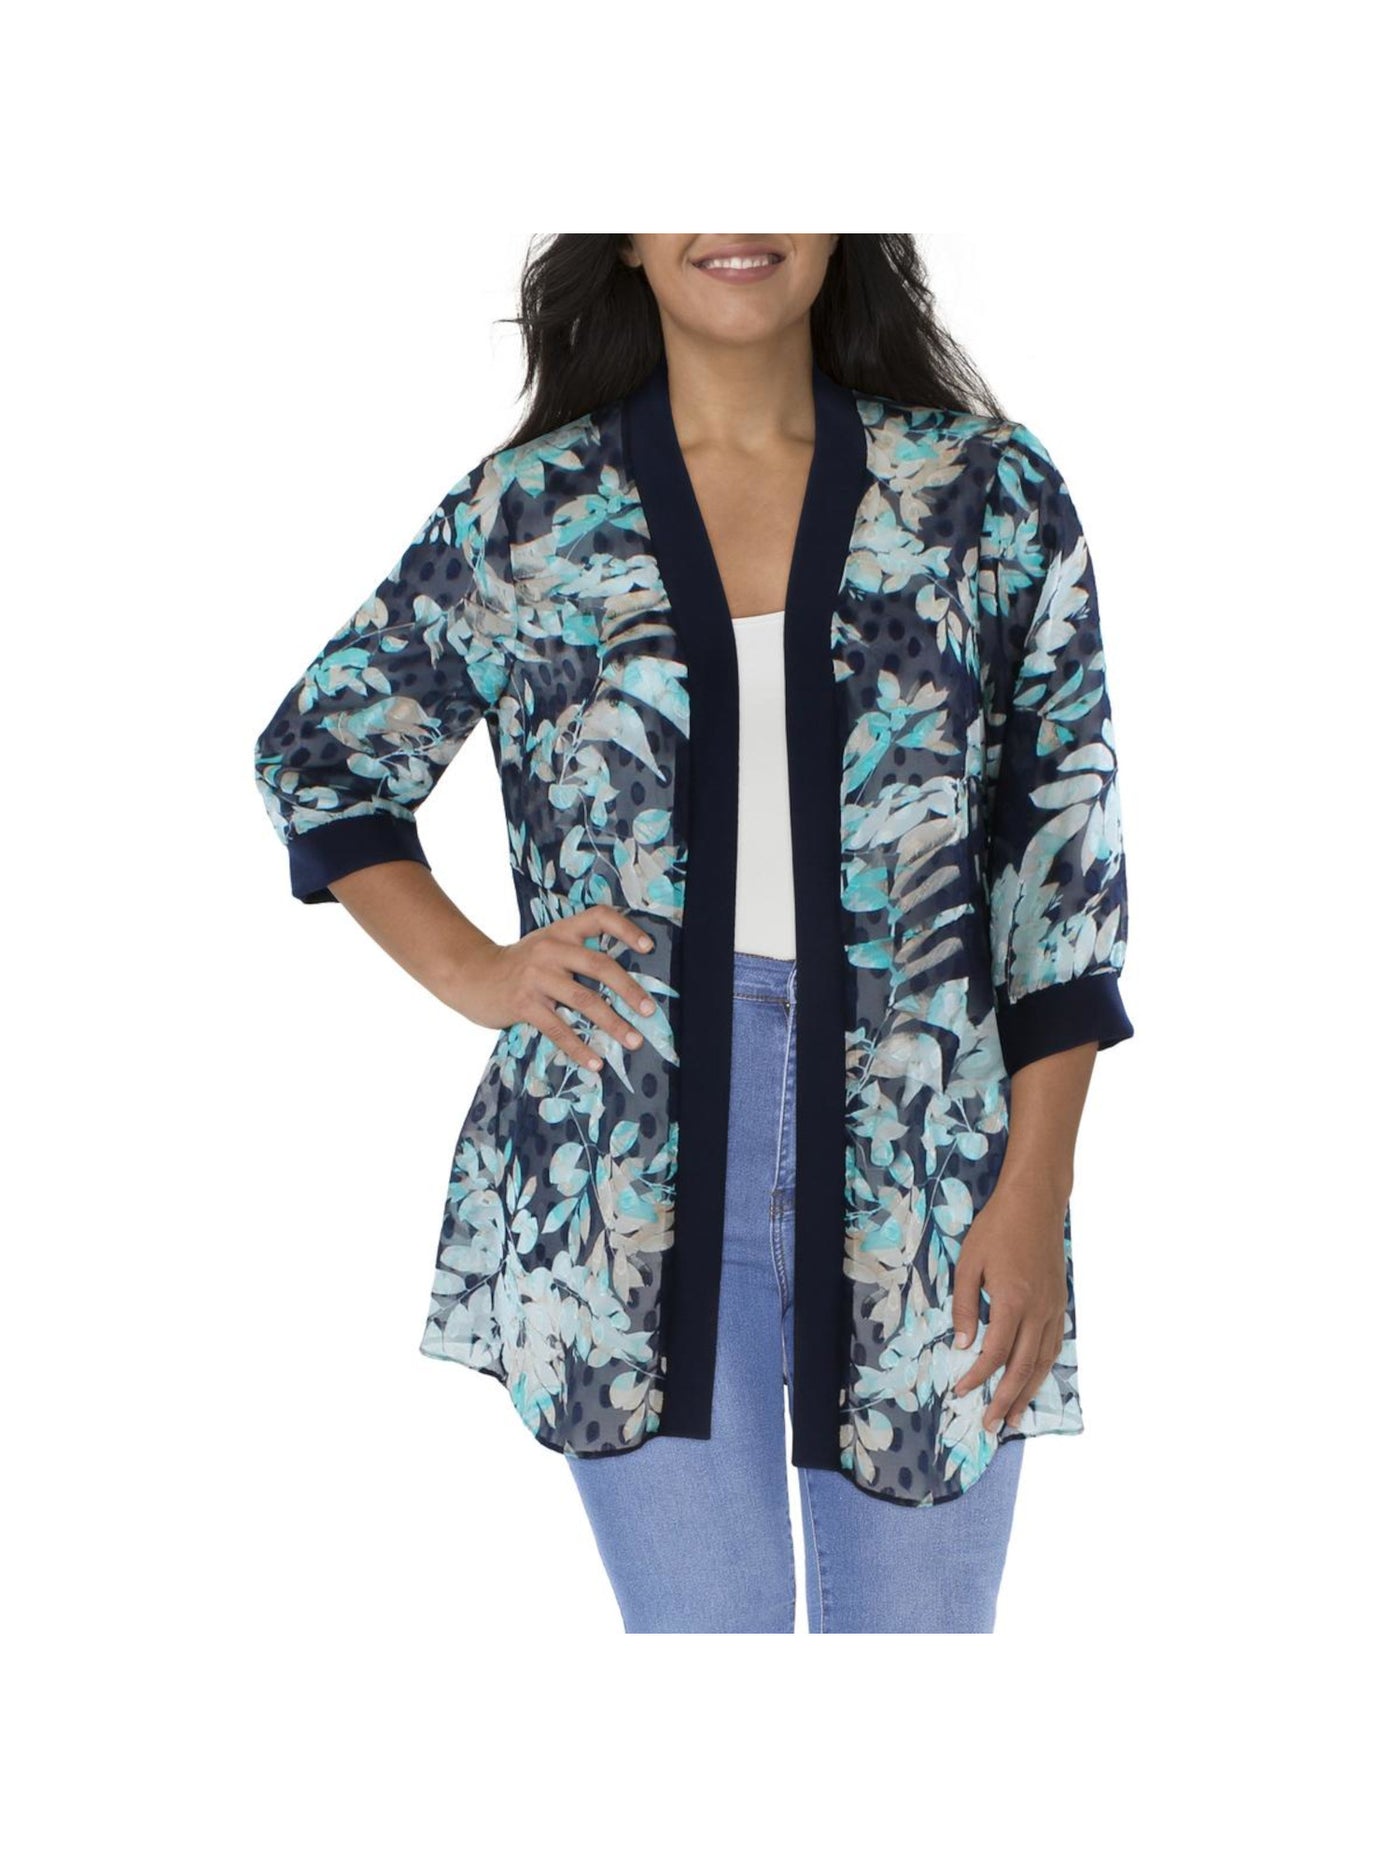 R&M RICHARDS PETITE Womens Navy Floral 3/4 Sleeve Open Front Wear To Work Cardigan Petites 4P